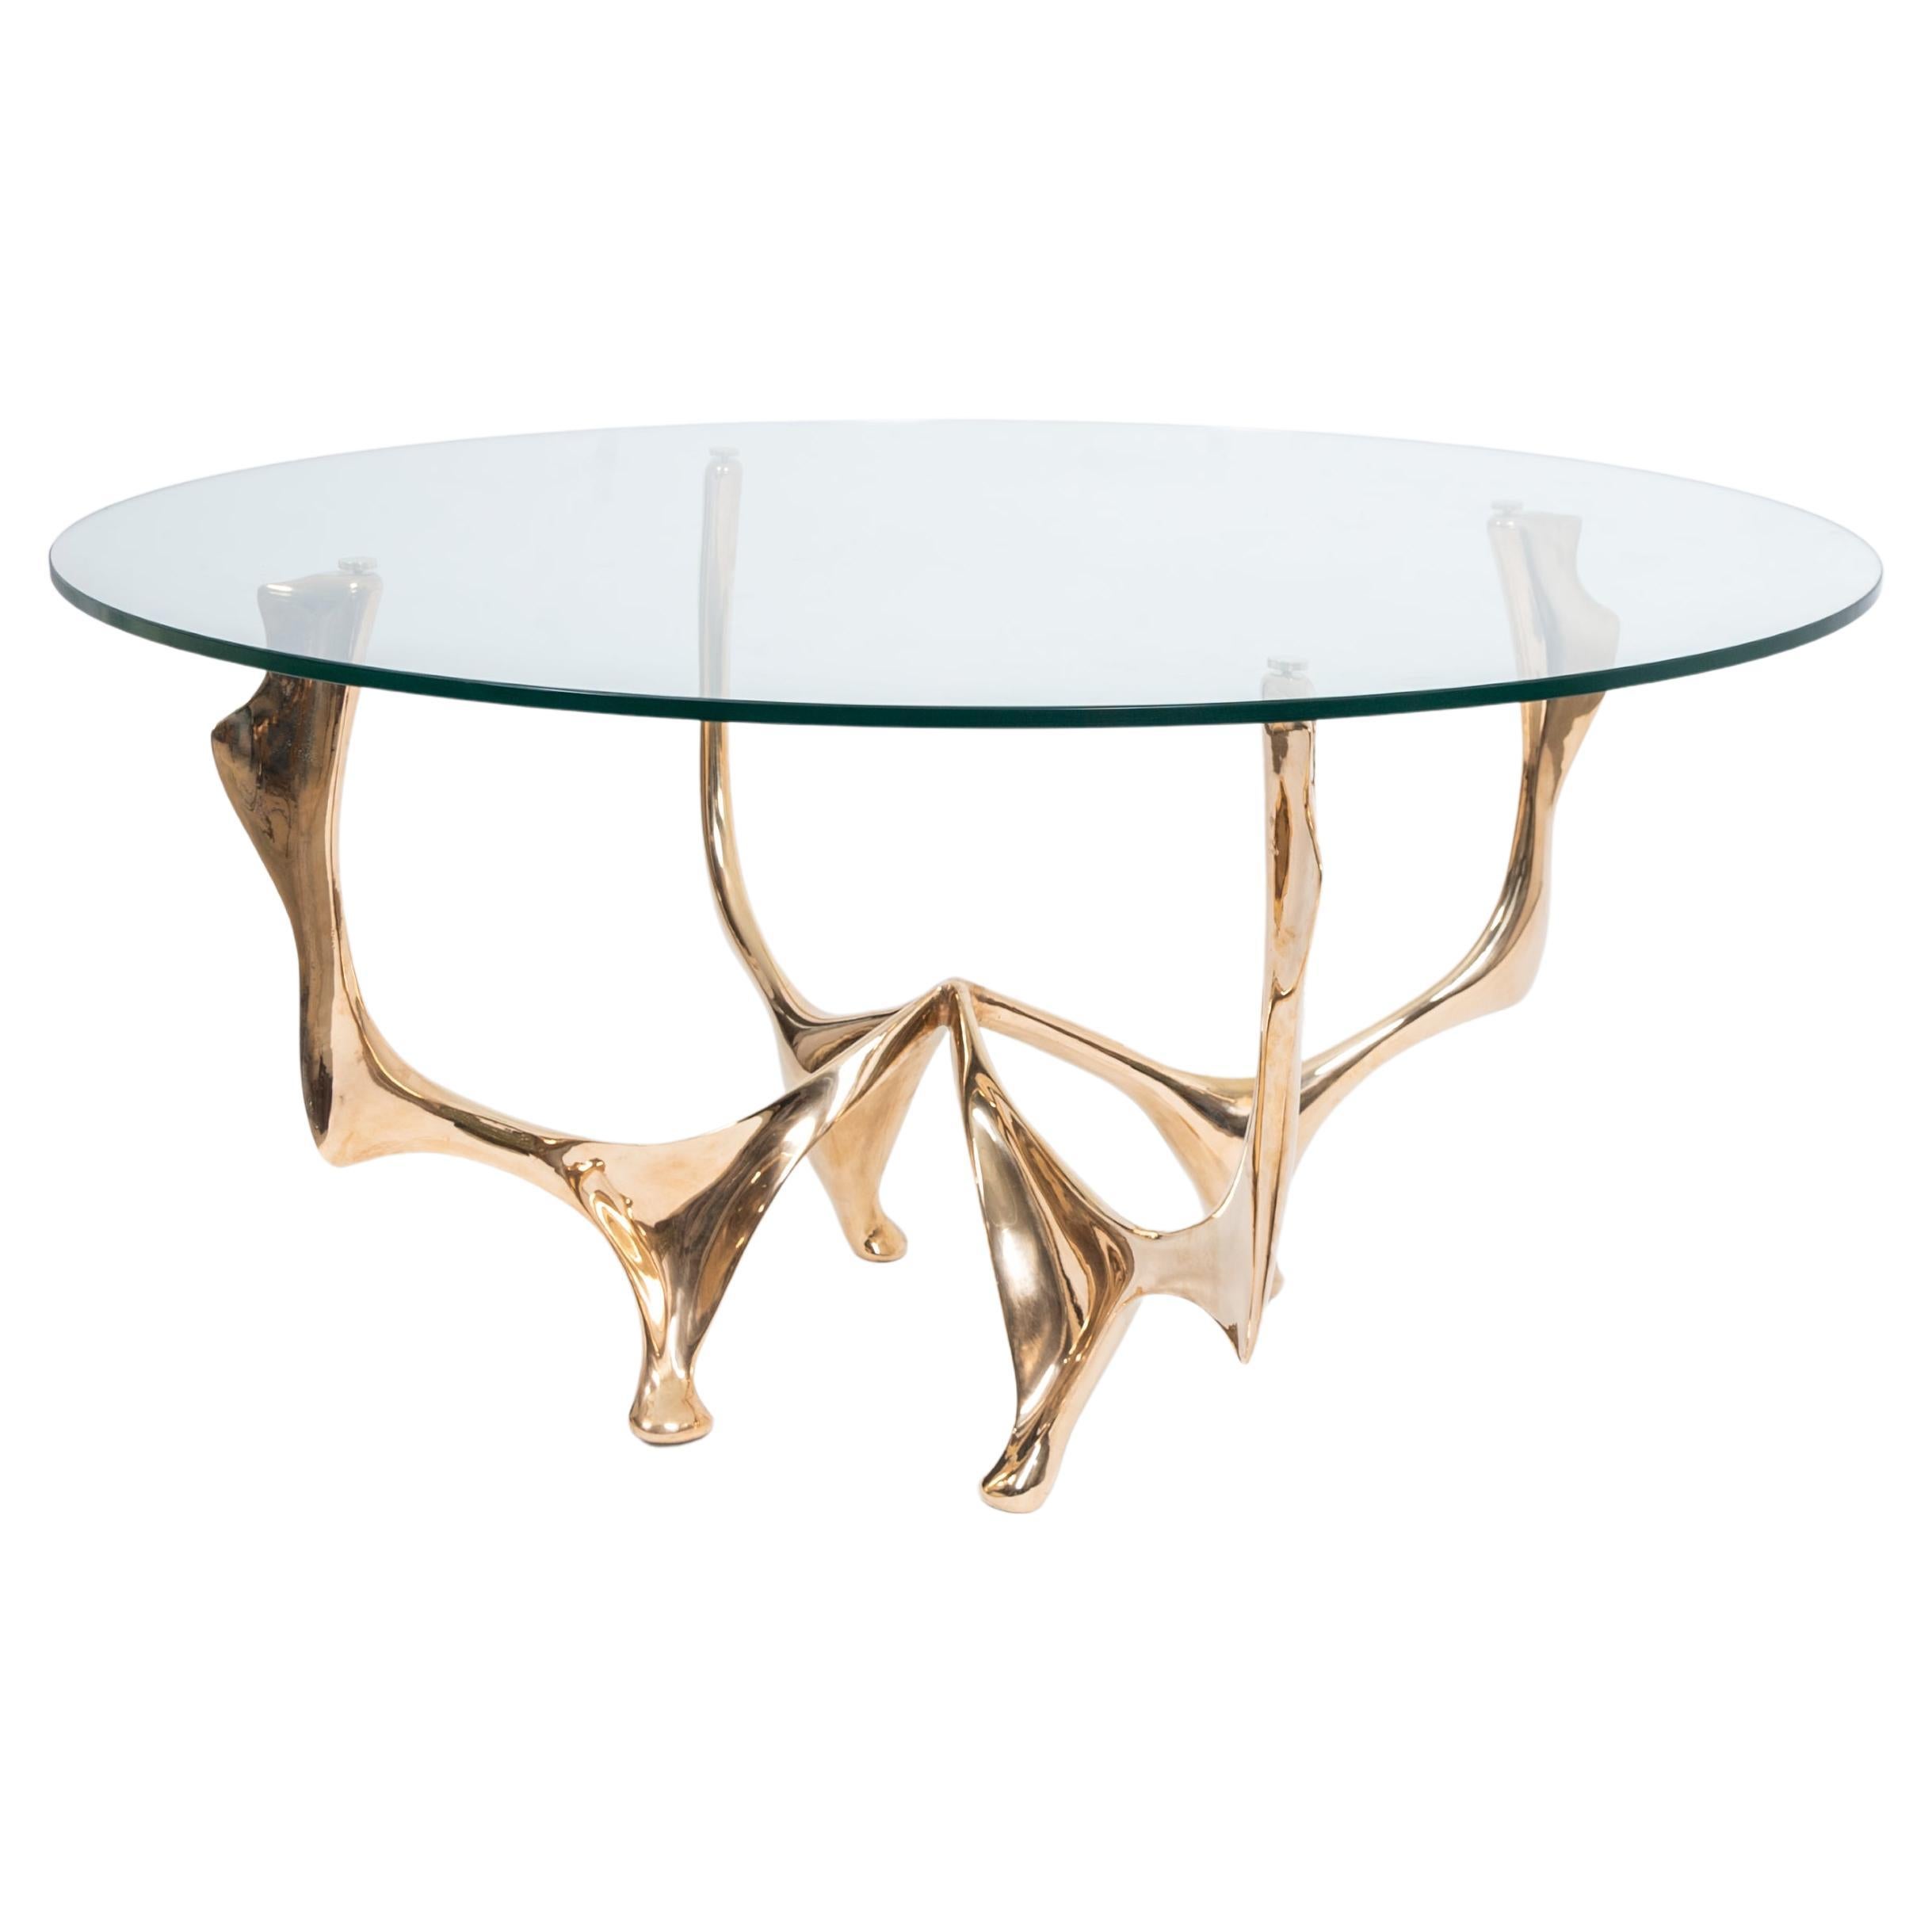 Contemporary Bronze and Glass top Dining table by Pierre Salagnac